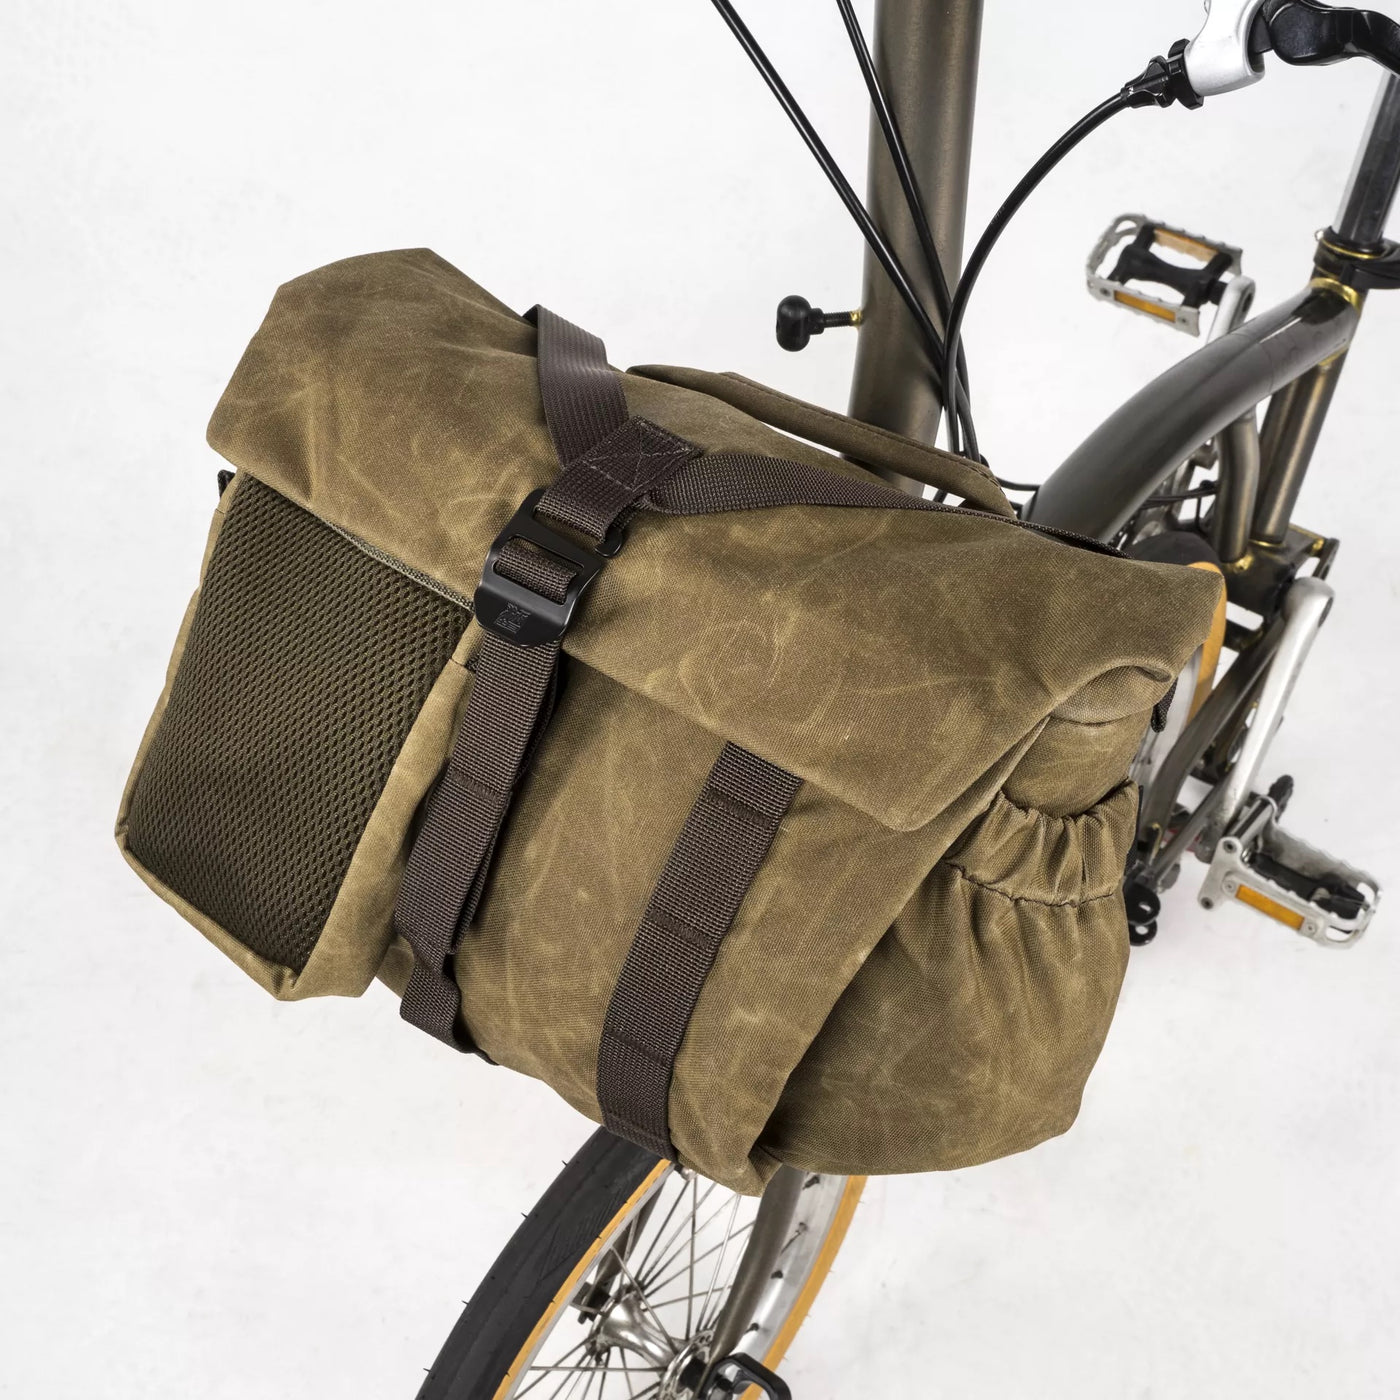 Wotancraft - Pilot Brompton Bag 7L | With 2 pouch modules (Carrier Frame not included)